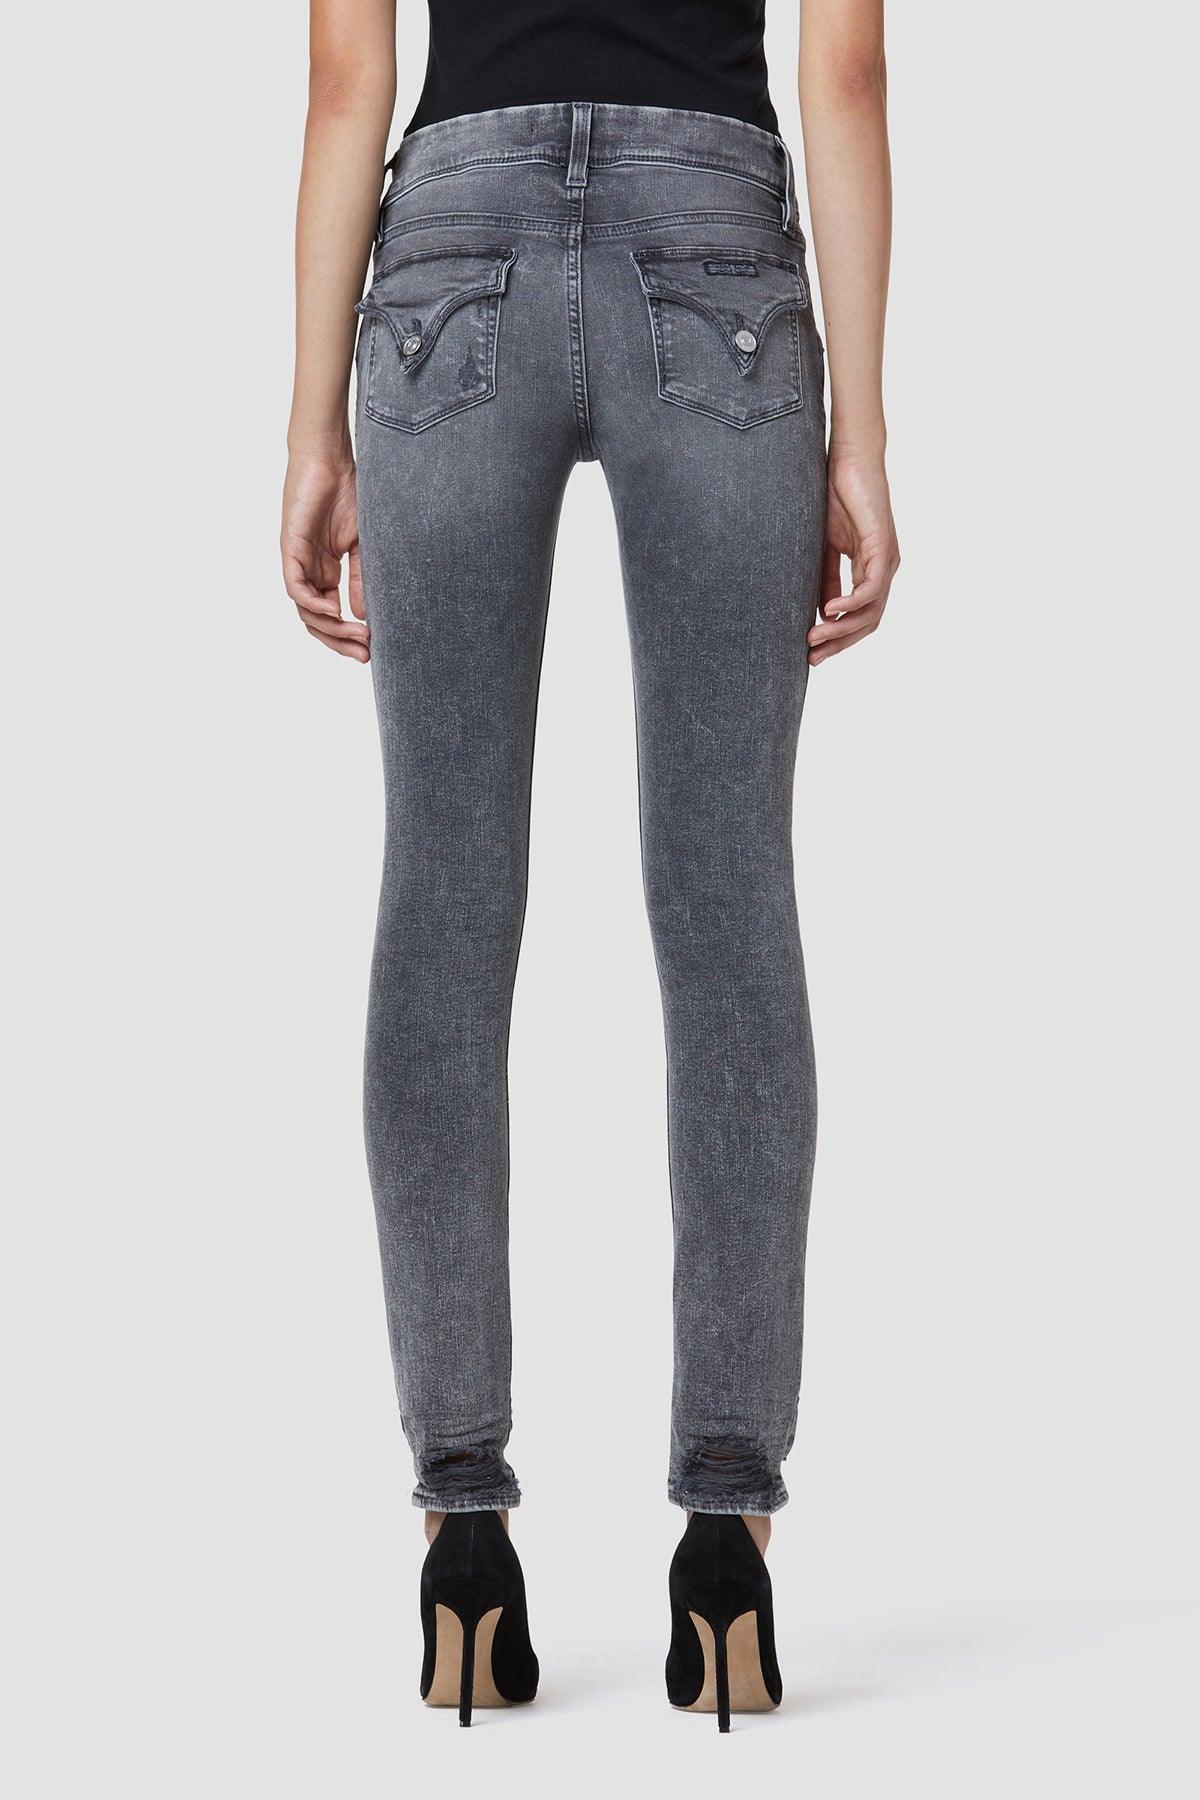 Collin Midrise Skinny Jeans in Thunderstruck by Hudson - Haven